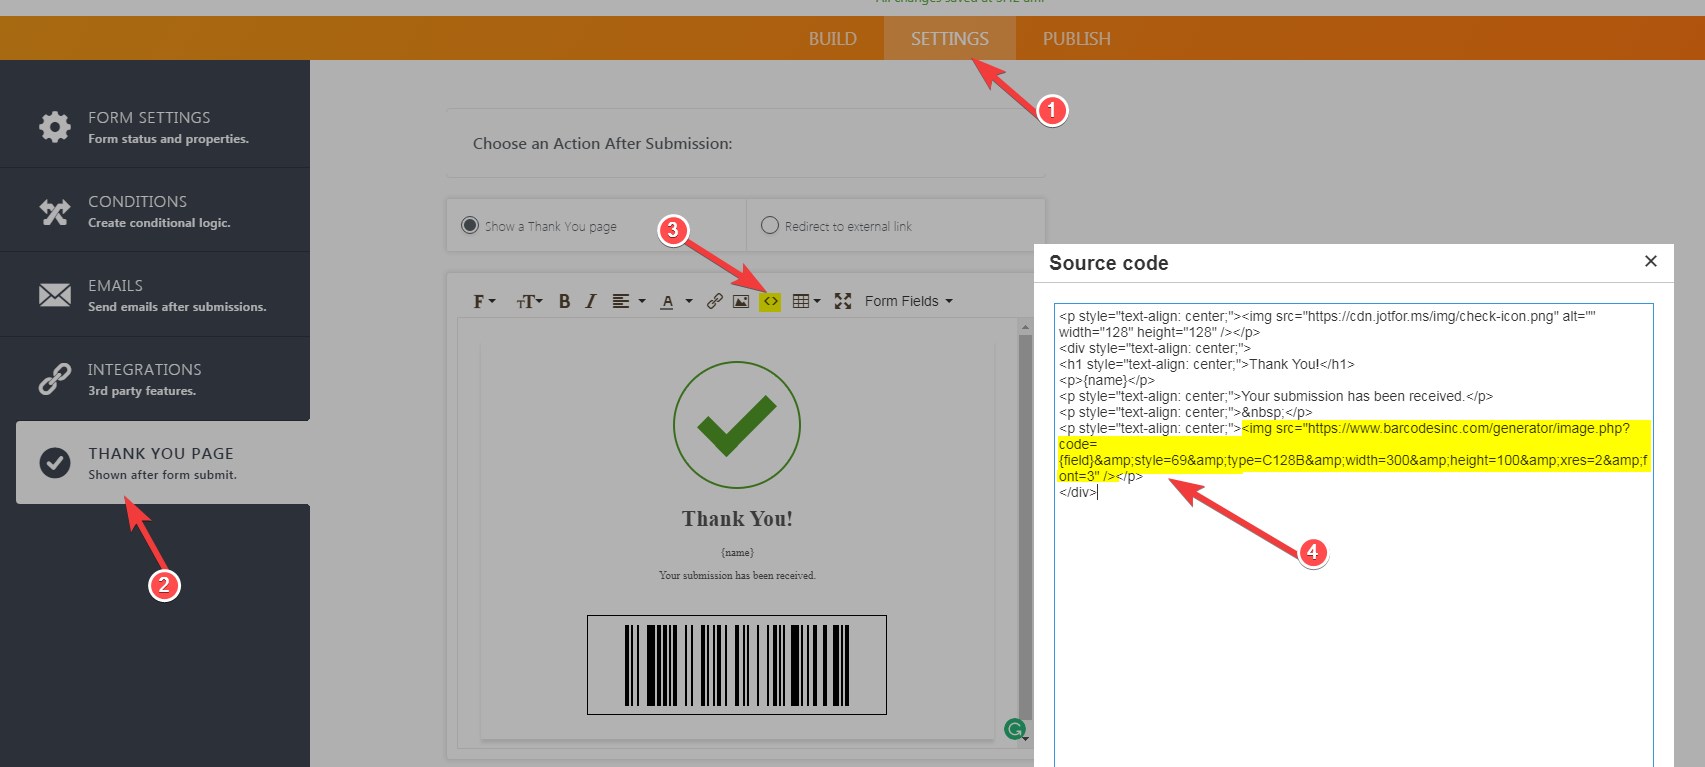 Is there a way for the ID Number (first field) input to be converted to a bar code? Image 1 Screenshot 20